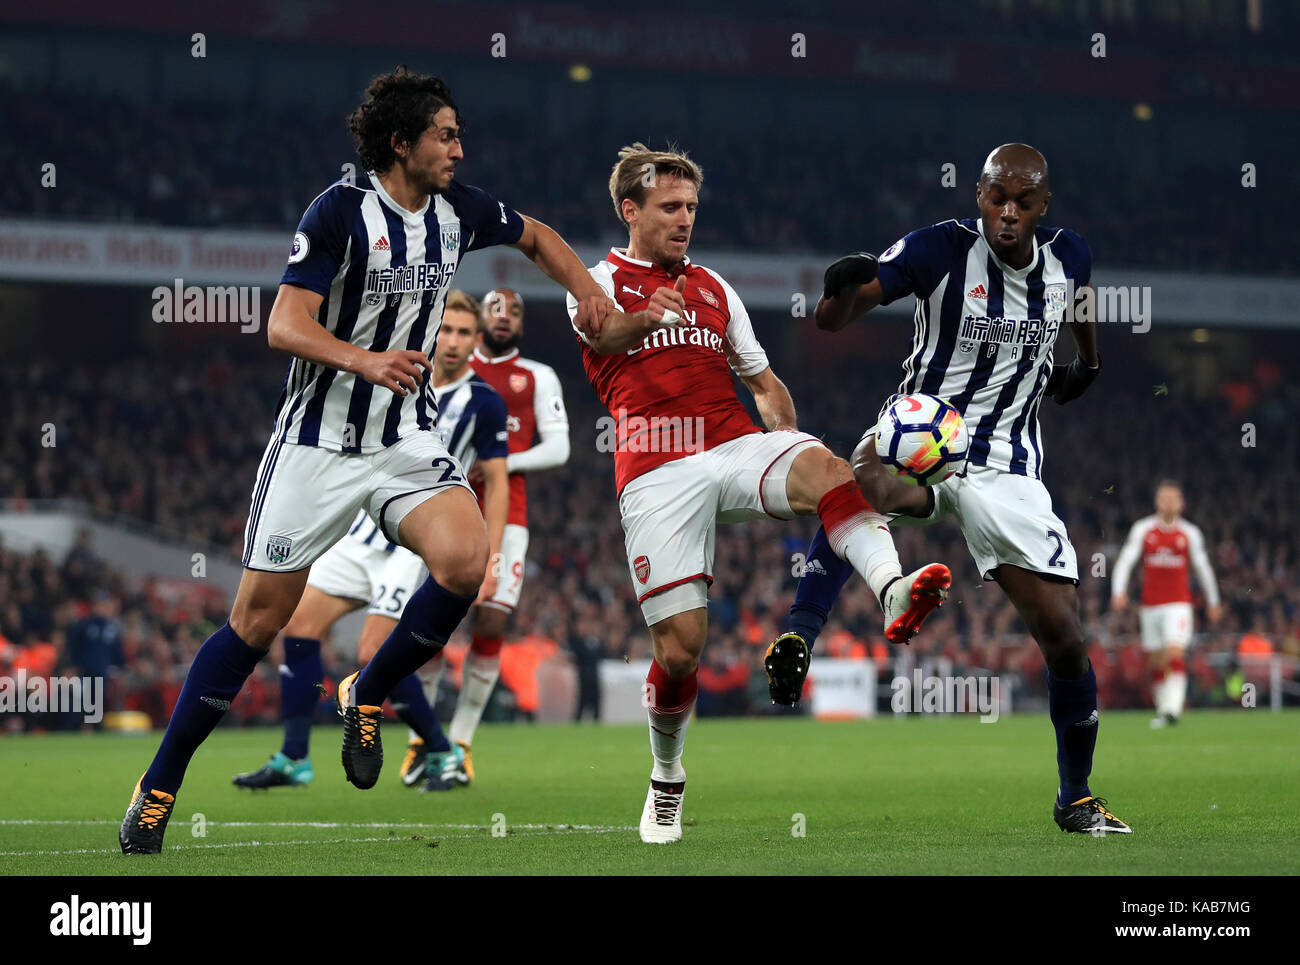 Arsenal's Nacho Monreal (centre) takes on West Bromwich Albion's Allan Nyom (right) and Ahmed Hegazy during the Premier League match at the Emirates Stadium, London. Stock Photo